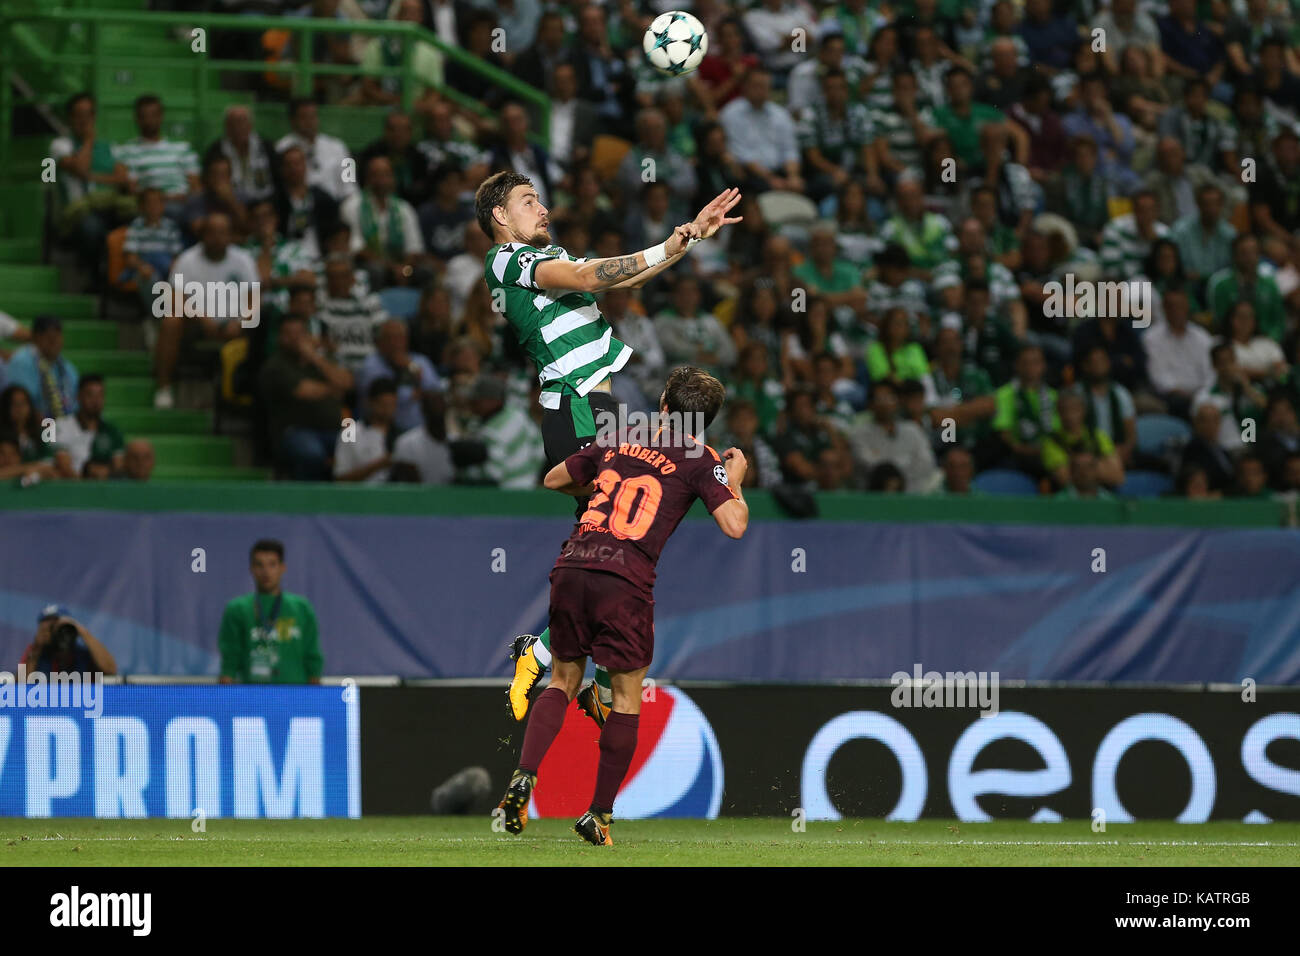 Lisbon, Portugal. 27th Sep, 2017. Sporting«s defender Sebastian Coates from Uruguay and Barcelona«s midfielder Sergi Roberto from Spain during the match between Sporting CP v FC Barcelona UEFA Champions League playoff match at Estadio Jose Alvalade on September 27, 2017 in Lisbon, Portugal. Credit: Bruno Barros/Alamy Live News Stock Photo